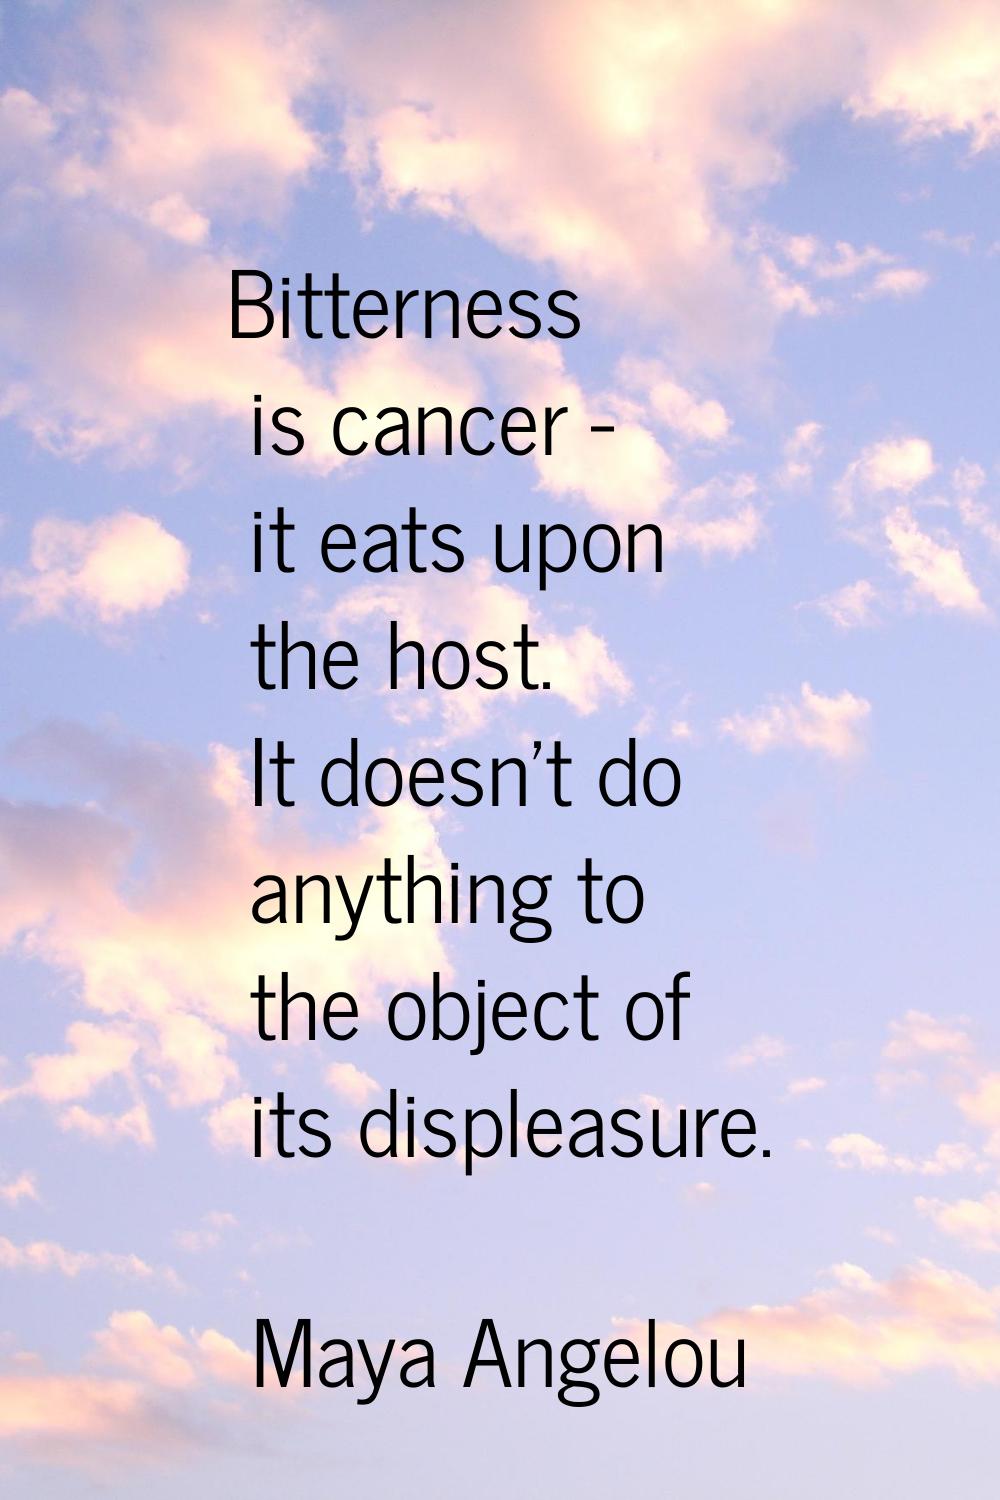 Bitterness is cancer - it eats upon the host. It doesn't do anything to the object of its displeasu